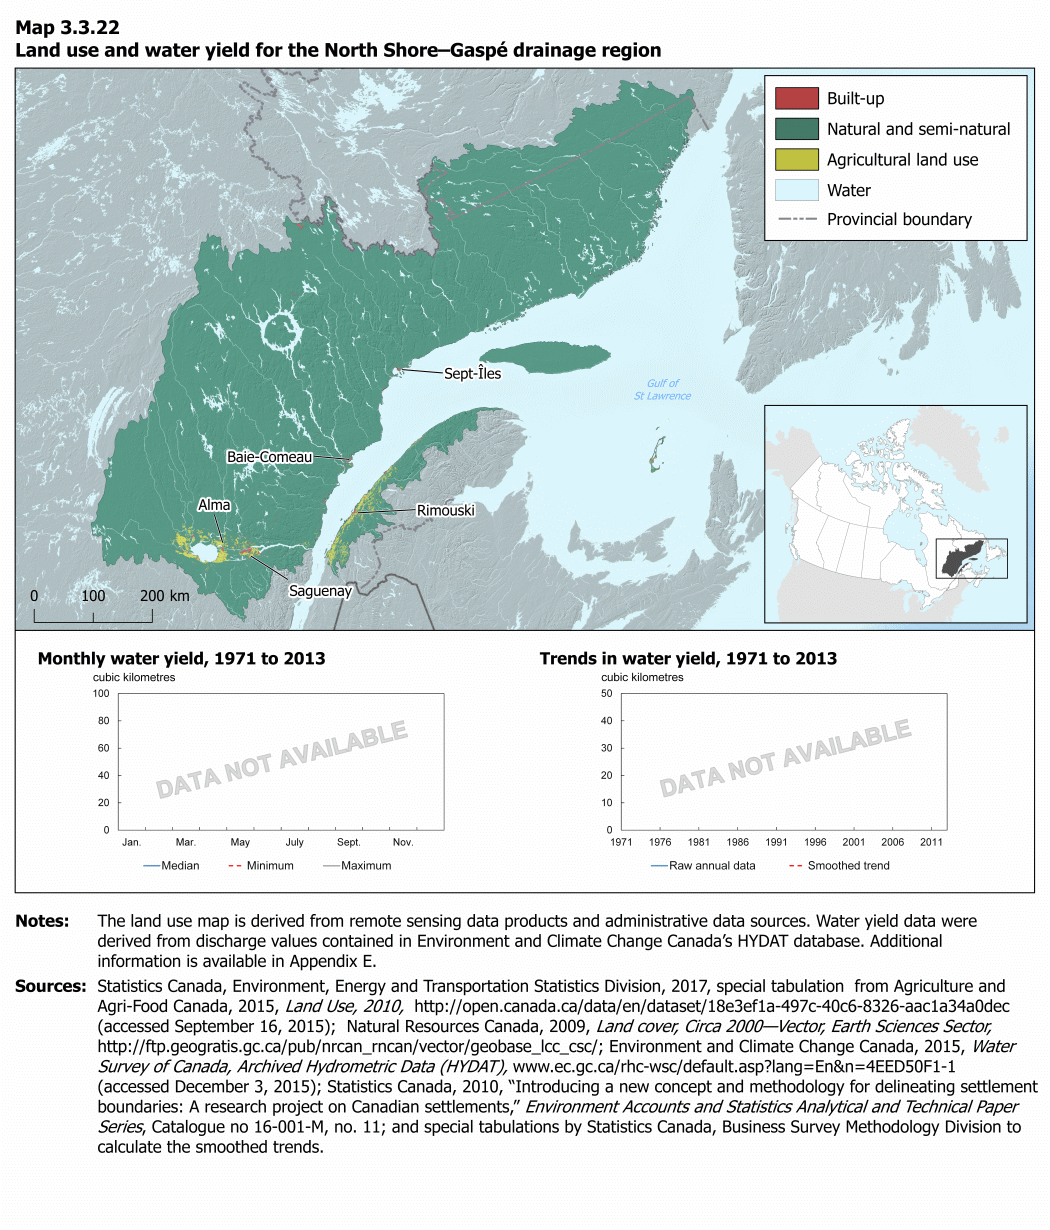 Map 3.3.22 Land use and water yield for the North Shore–Gaspé drainage region